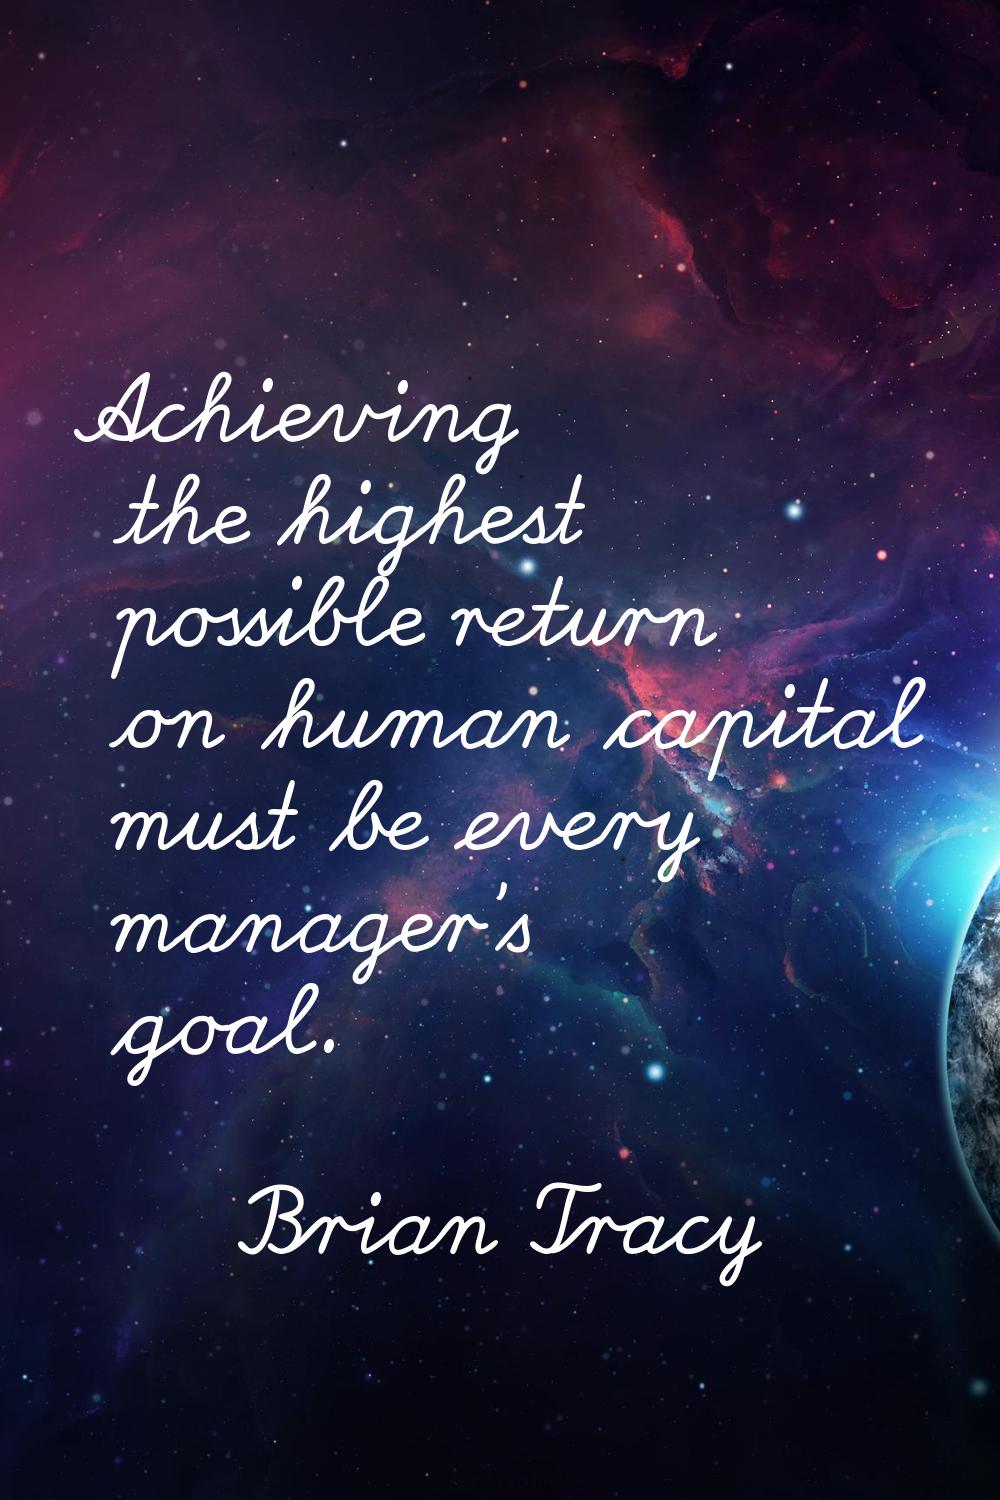 Achieving the highest possible return on human capital must be every manager's goal.